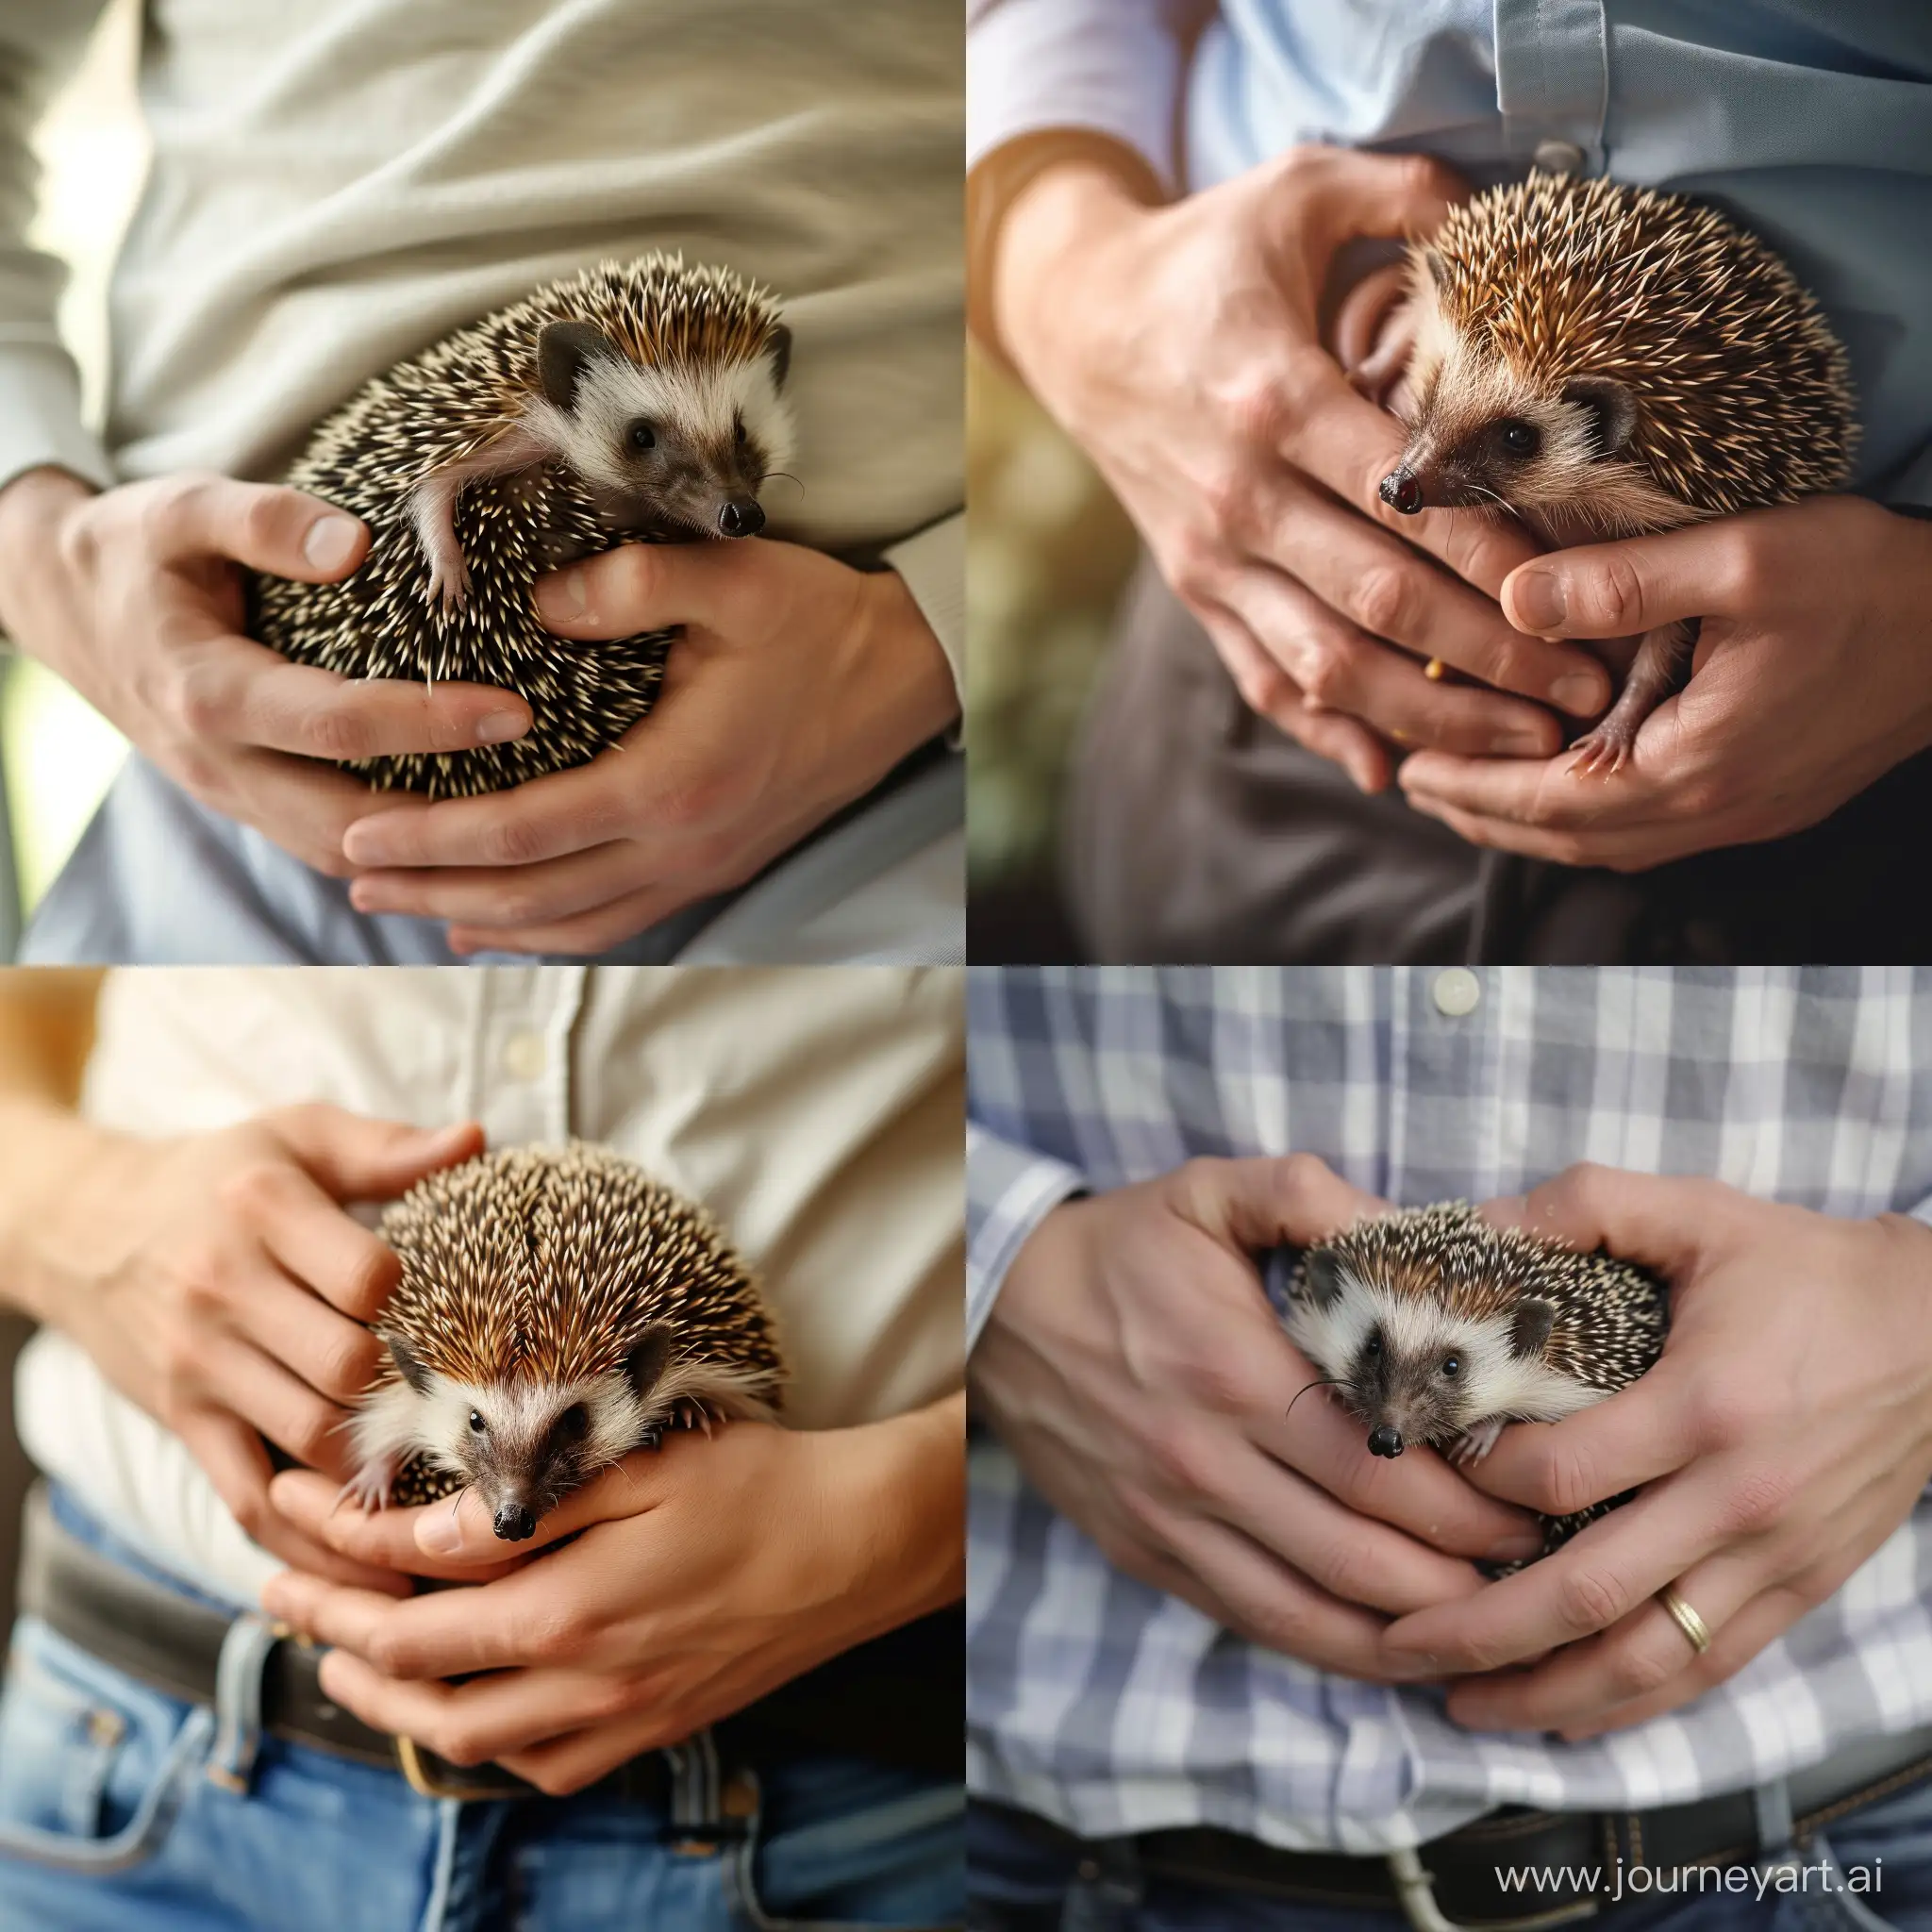 Man-Experiencing-Severe-Stomach-Pain-resembling-Hedgehog-Indigestion